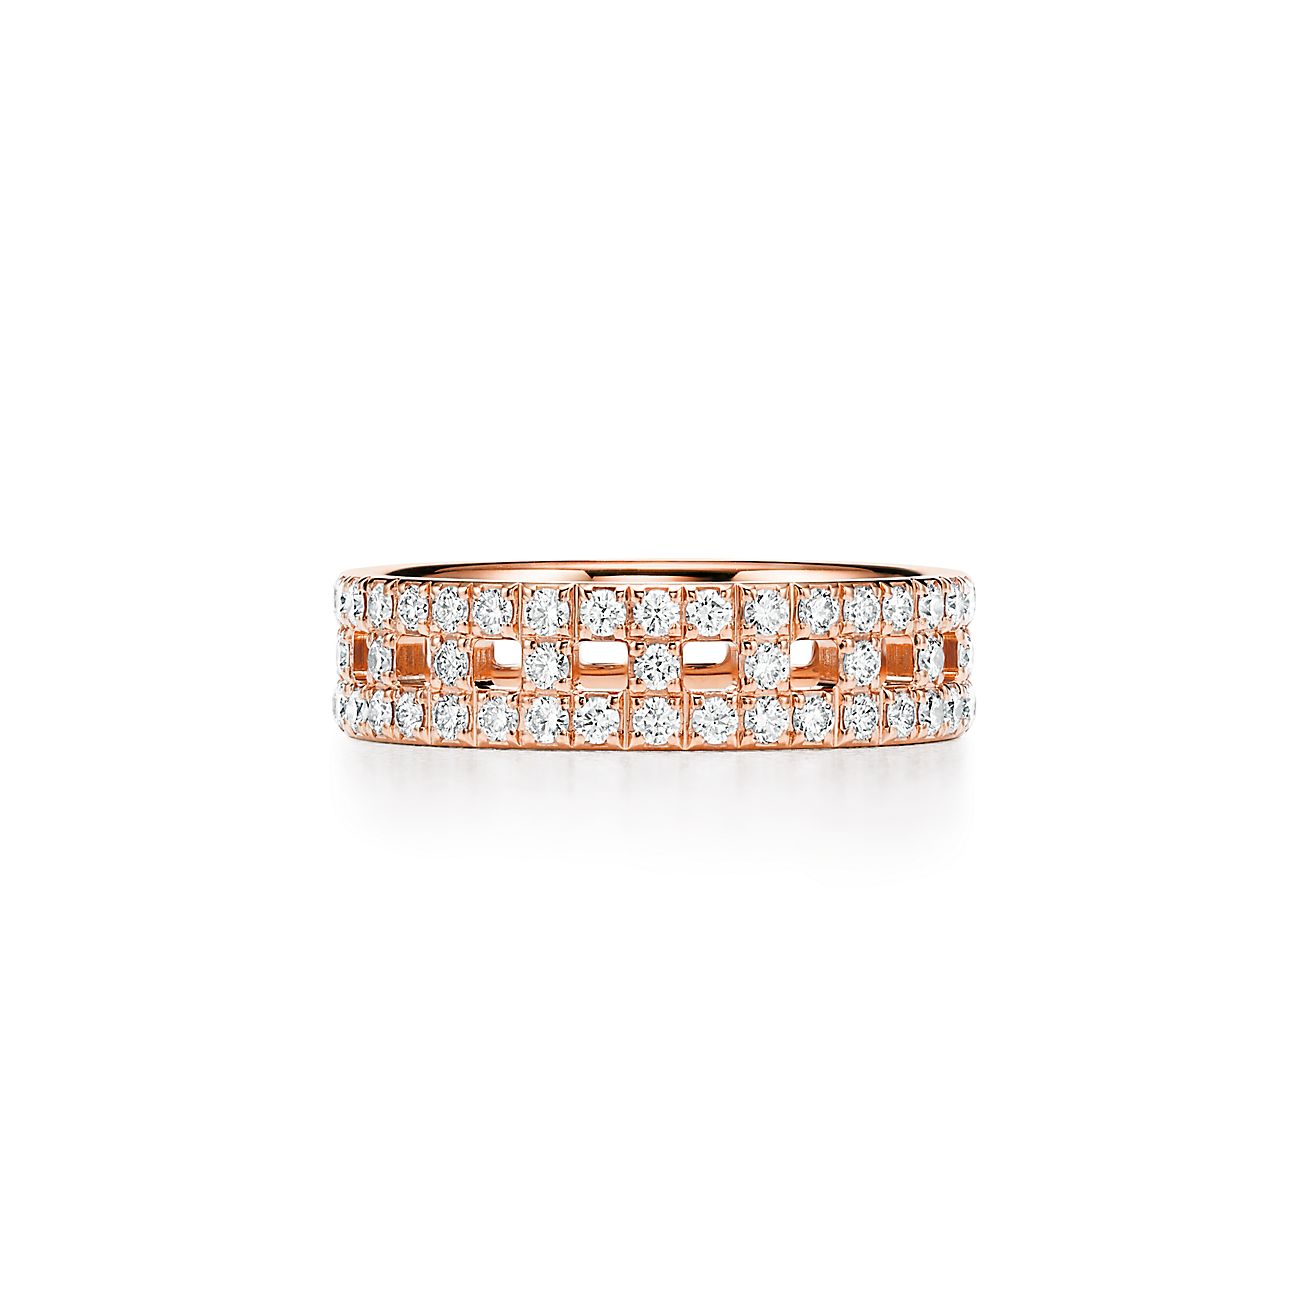 Tiffany T True wide ring in 18k rose gold with pavé diamonds, 5.5 mm wide. | Tiffany & Co.